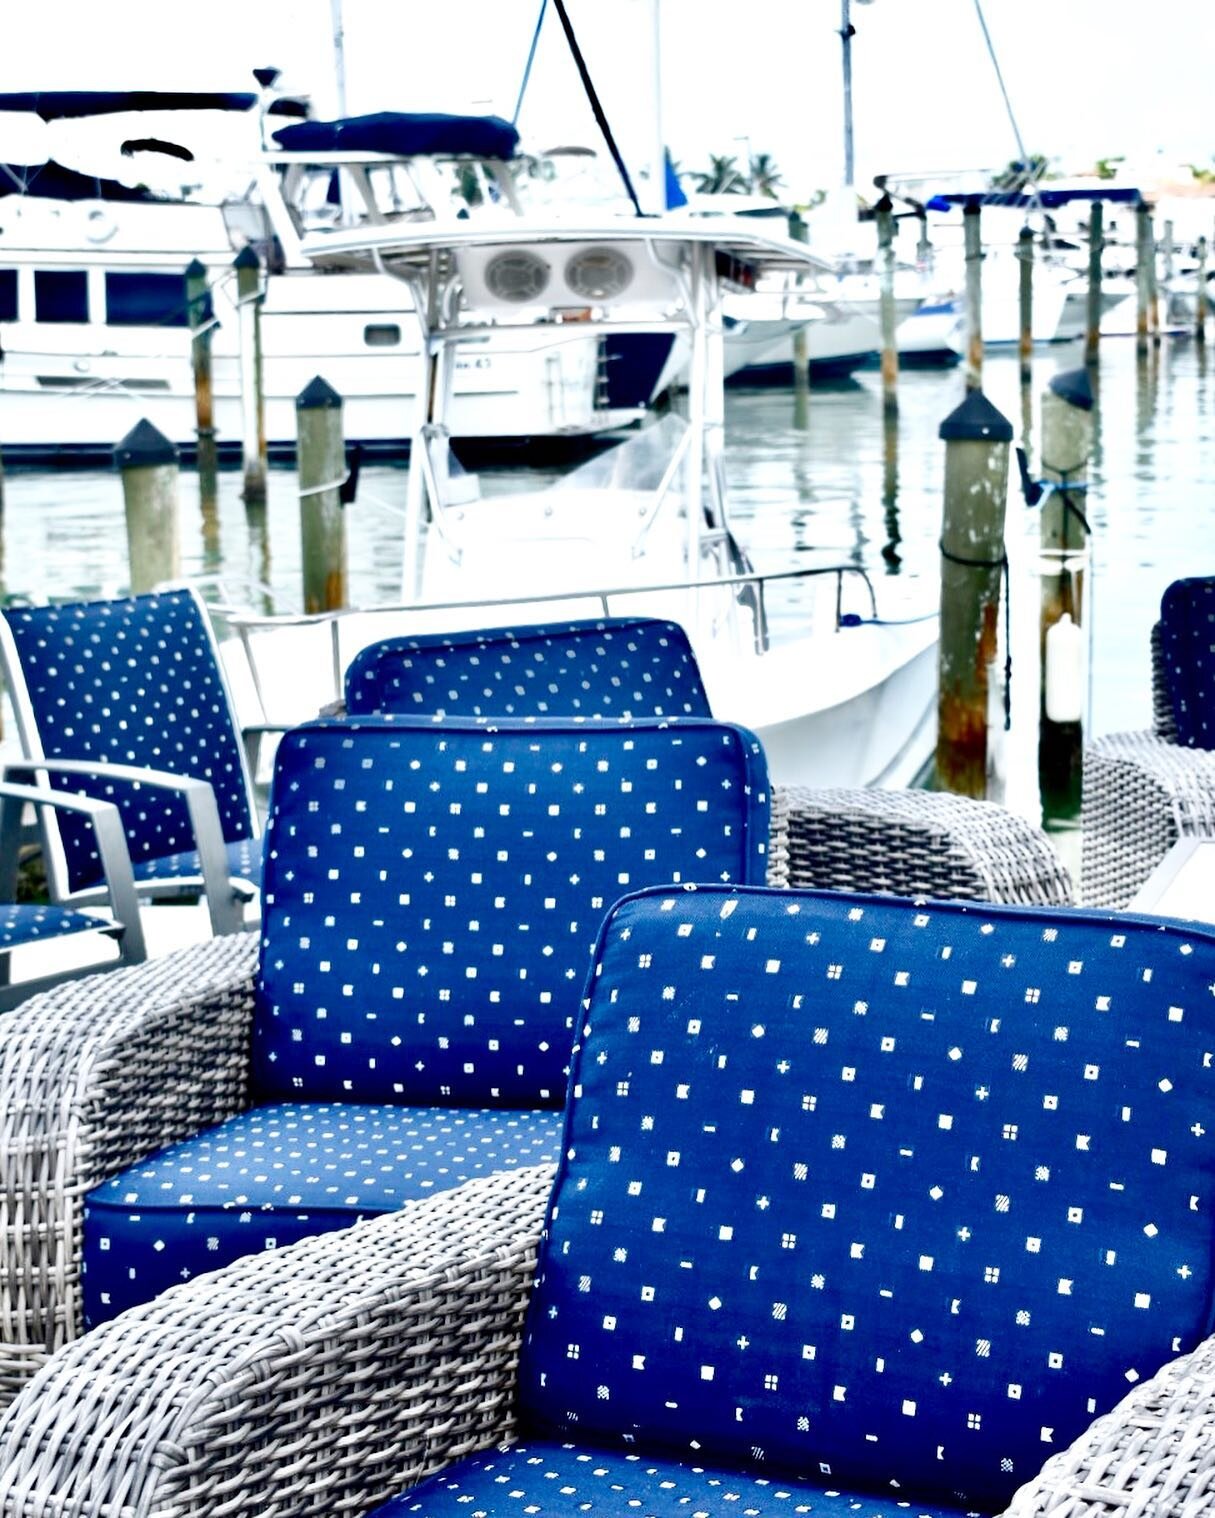 Weekend style. 
By land or by sea (my preference) may yours (very soon) be a breeze!
.
.
.
.
.
.
.
.
.
.
.
.
#boat #blue #chair #outdoorfurniture #seaside #weekend #coastalliving #travelphotography #coastaldecor #coast #thedesigndailyblog #watercolor